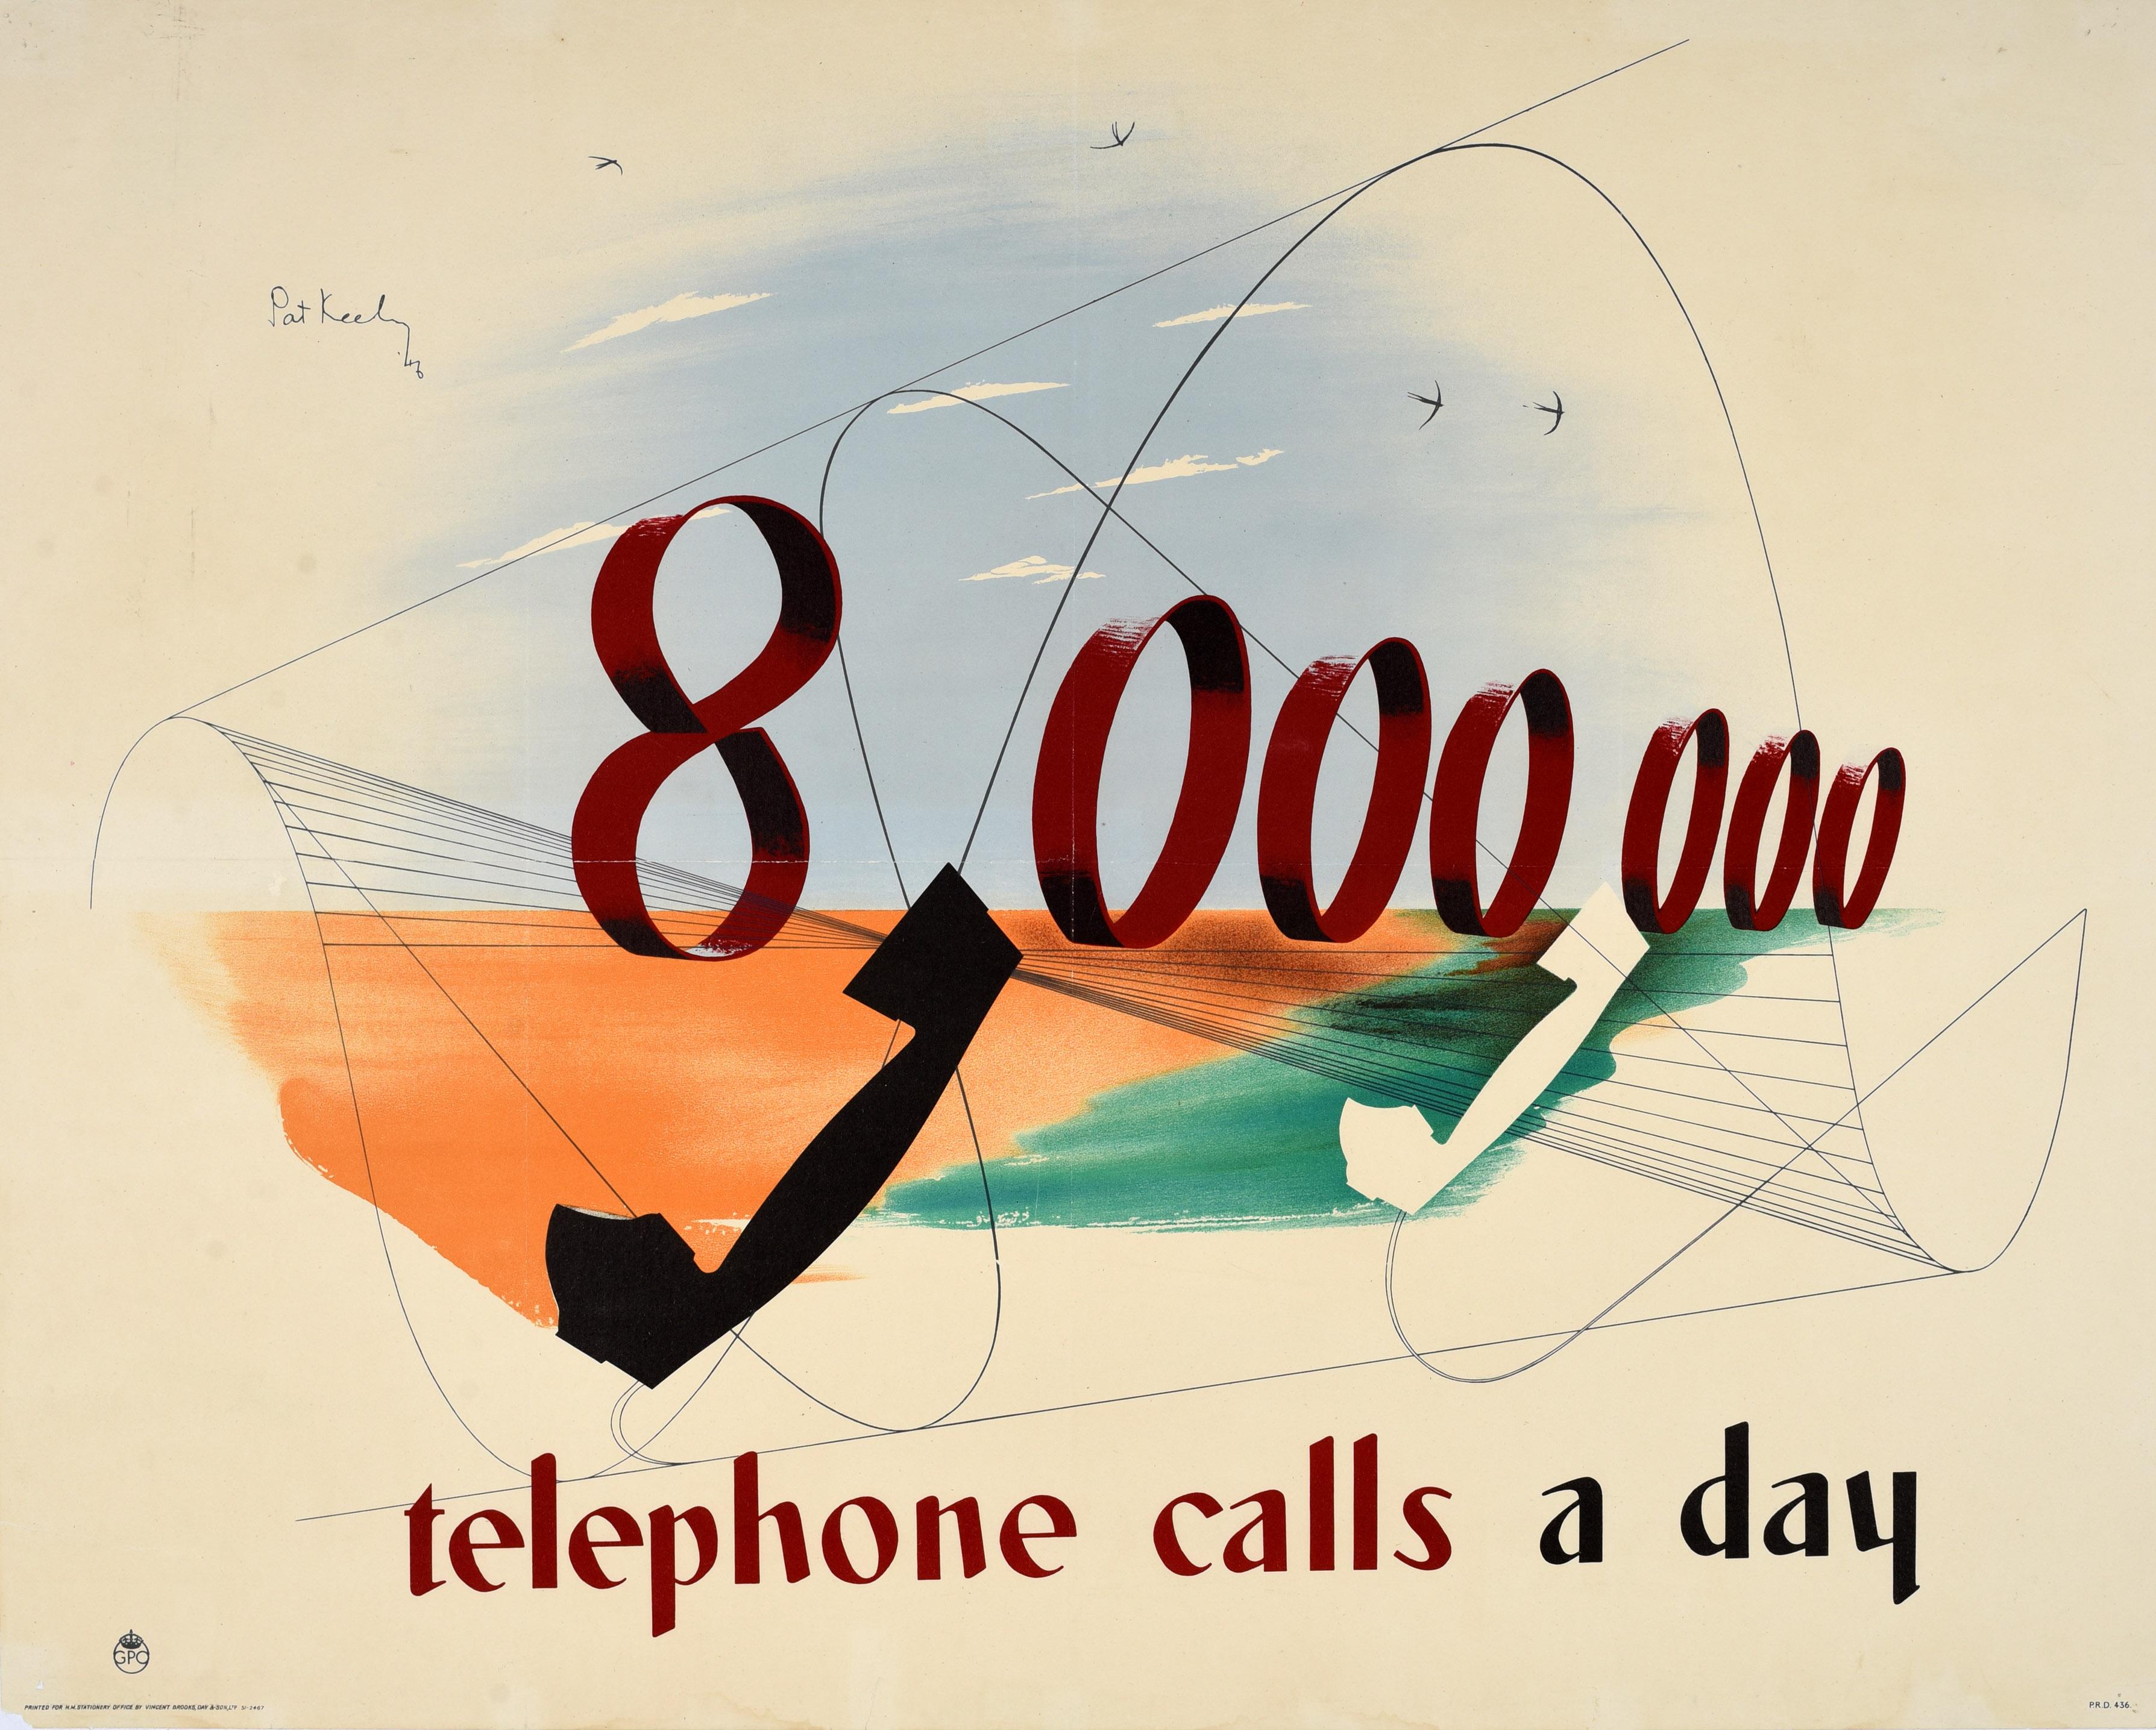 Original vintage poster published by the General Post Office GPO - 8,000,000 telephone calls a day - featuring a great graphic design by the notable British artist Pat Keely (Patrick Cokayne Keely; 1901-1970) depicting the large numbers in deep red